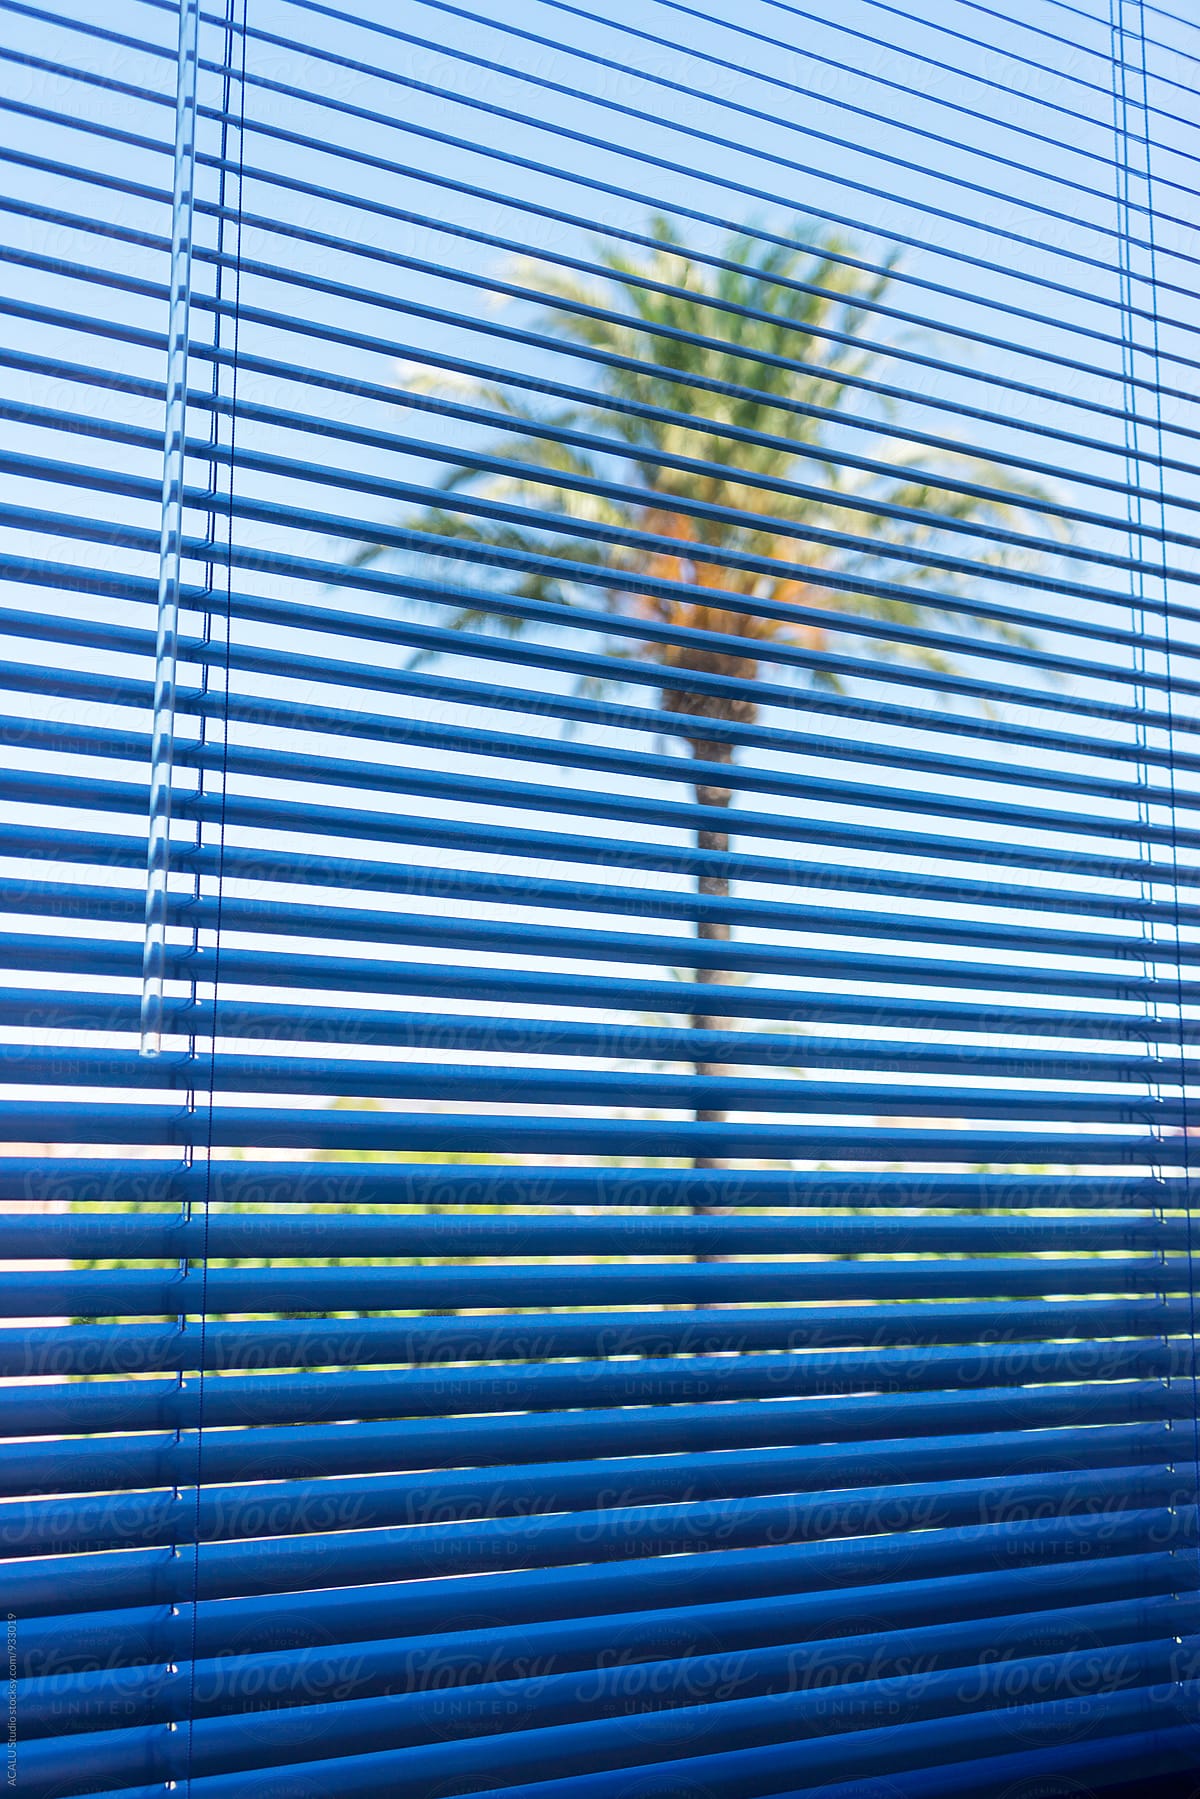 Palm tree through a window and blind